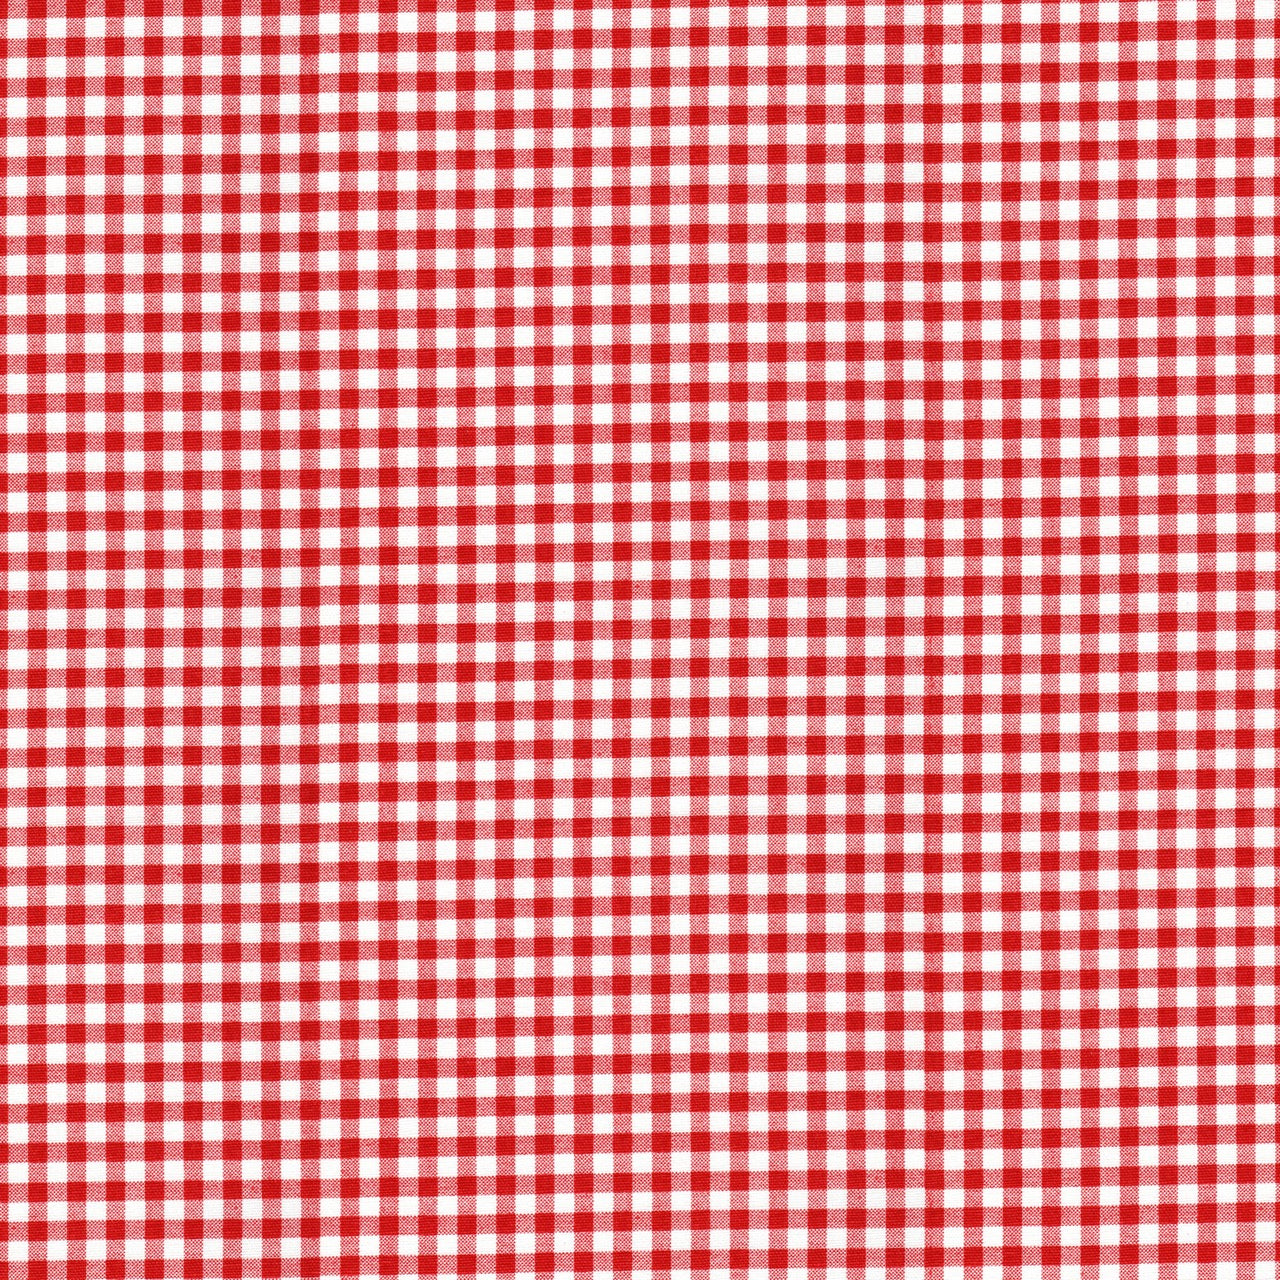 Tailored Crib Skirt in Lipstick Red Large Gingham Check on White Plaid